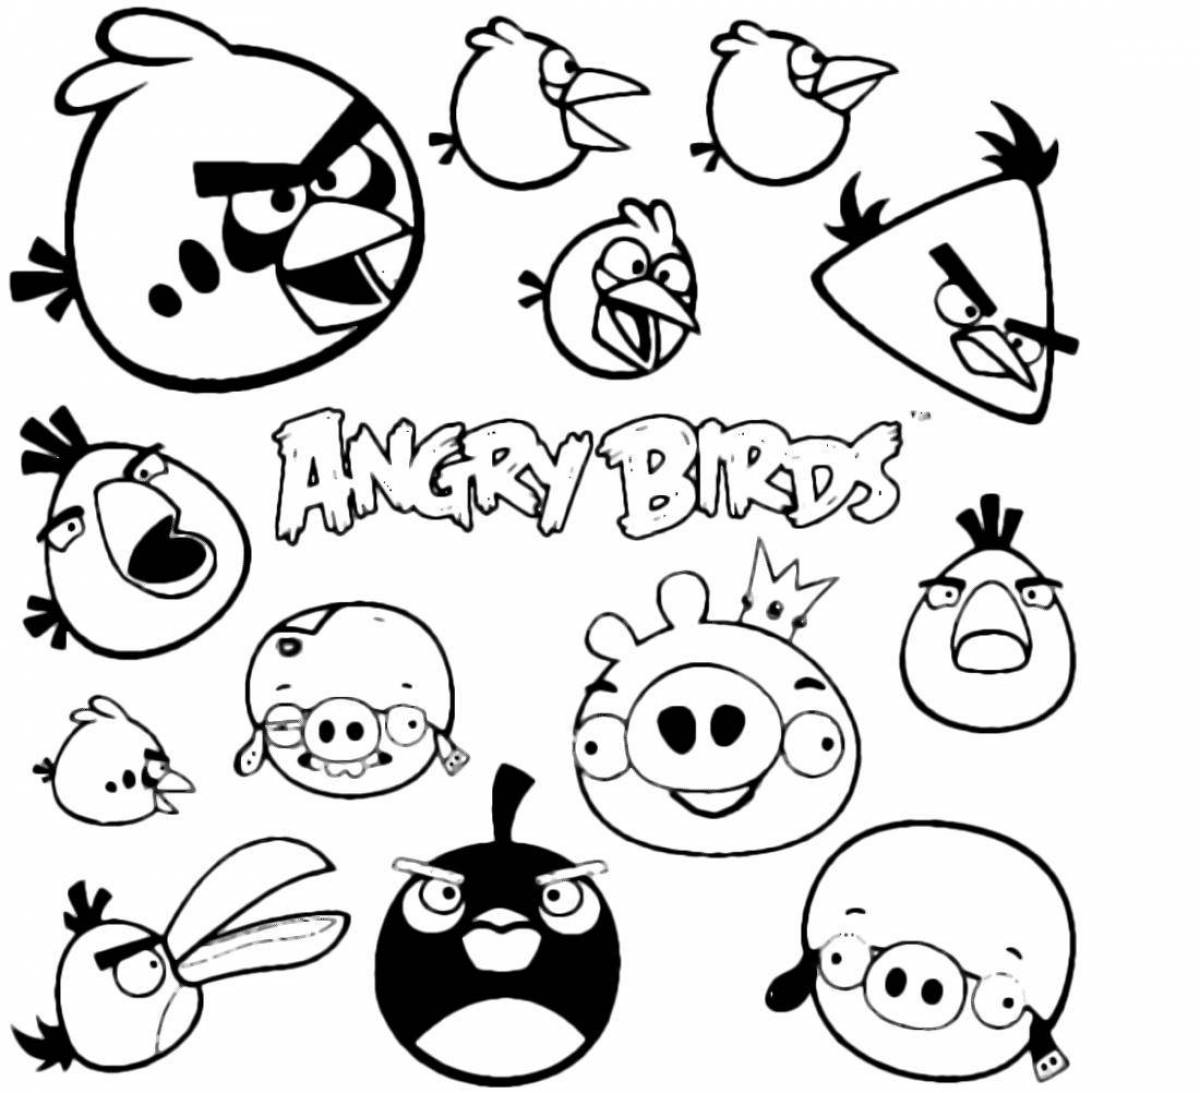 Angry birds #2